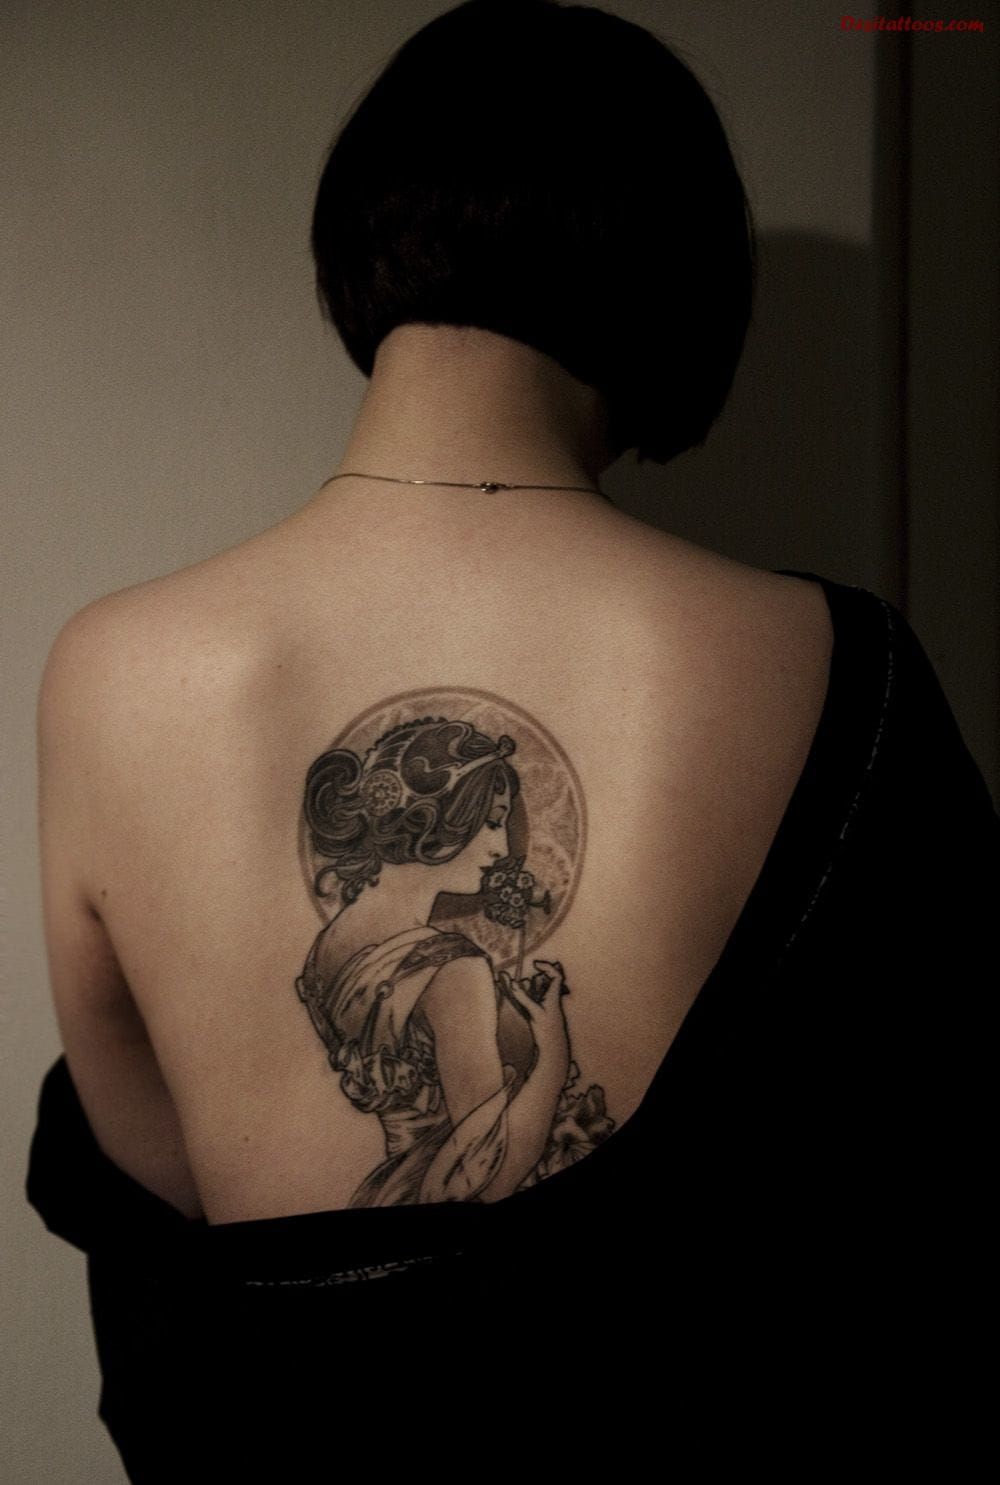 Delicate back tattoo by Electric Linda.